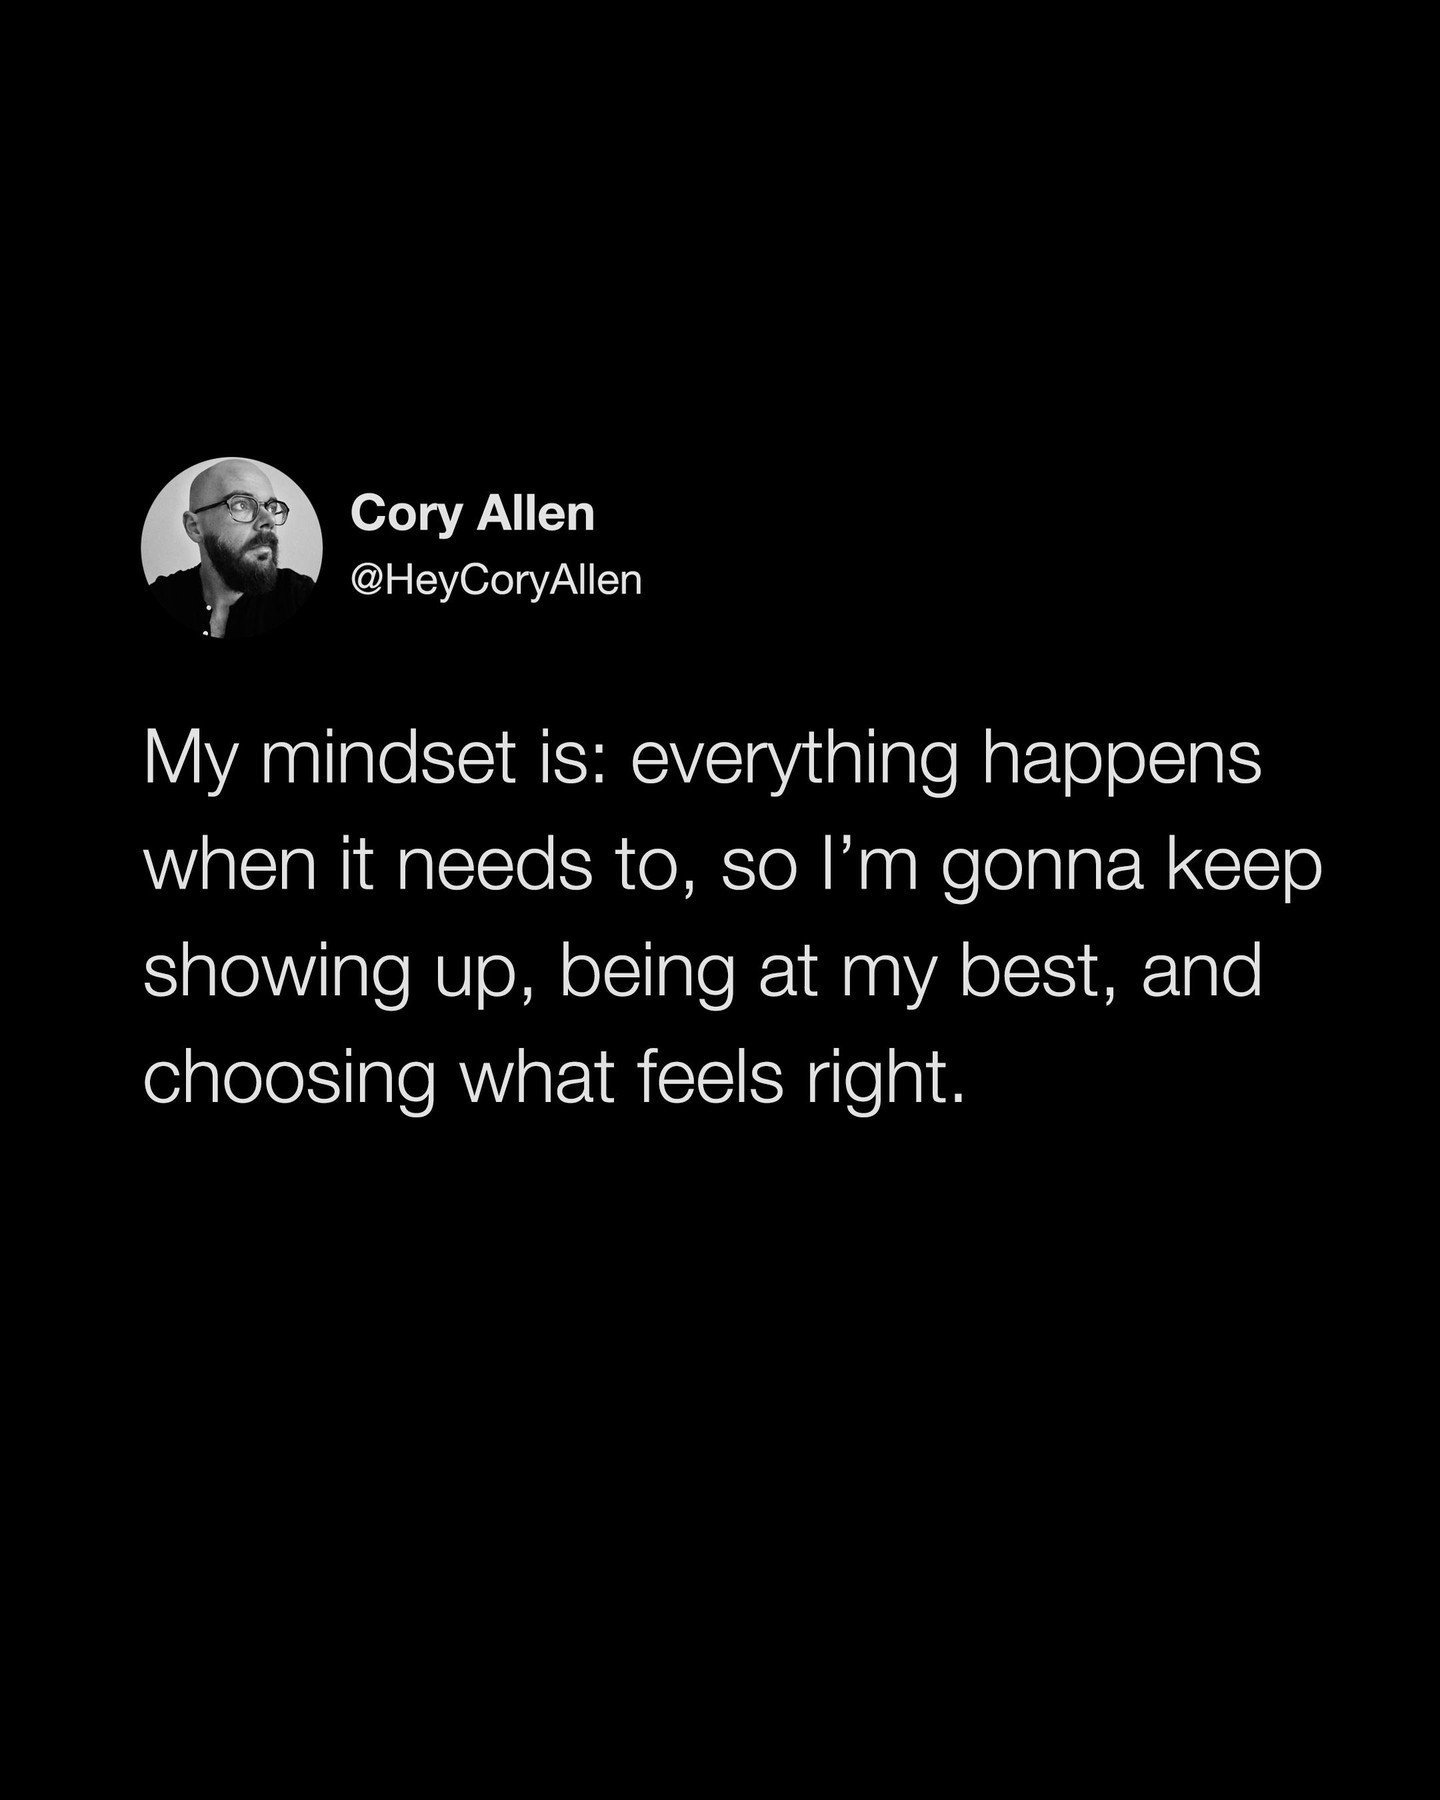 Drop a 🖤 if you feel this.

@heycoryallen: My mindset is: everything happens when it needs to, so I&rsquo;m gonna keep showing up, being at my best, and choosing what feels right.